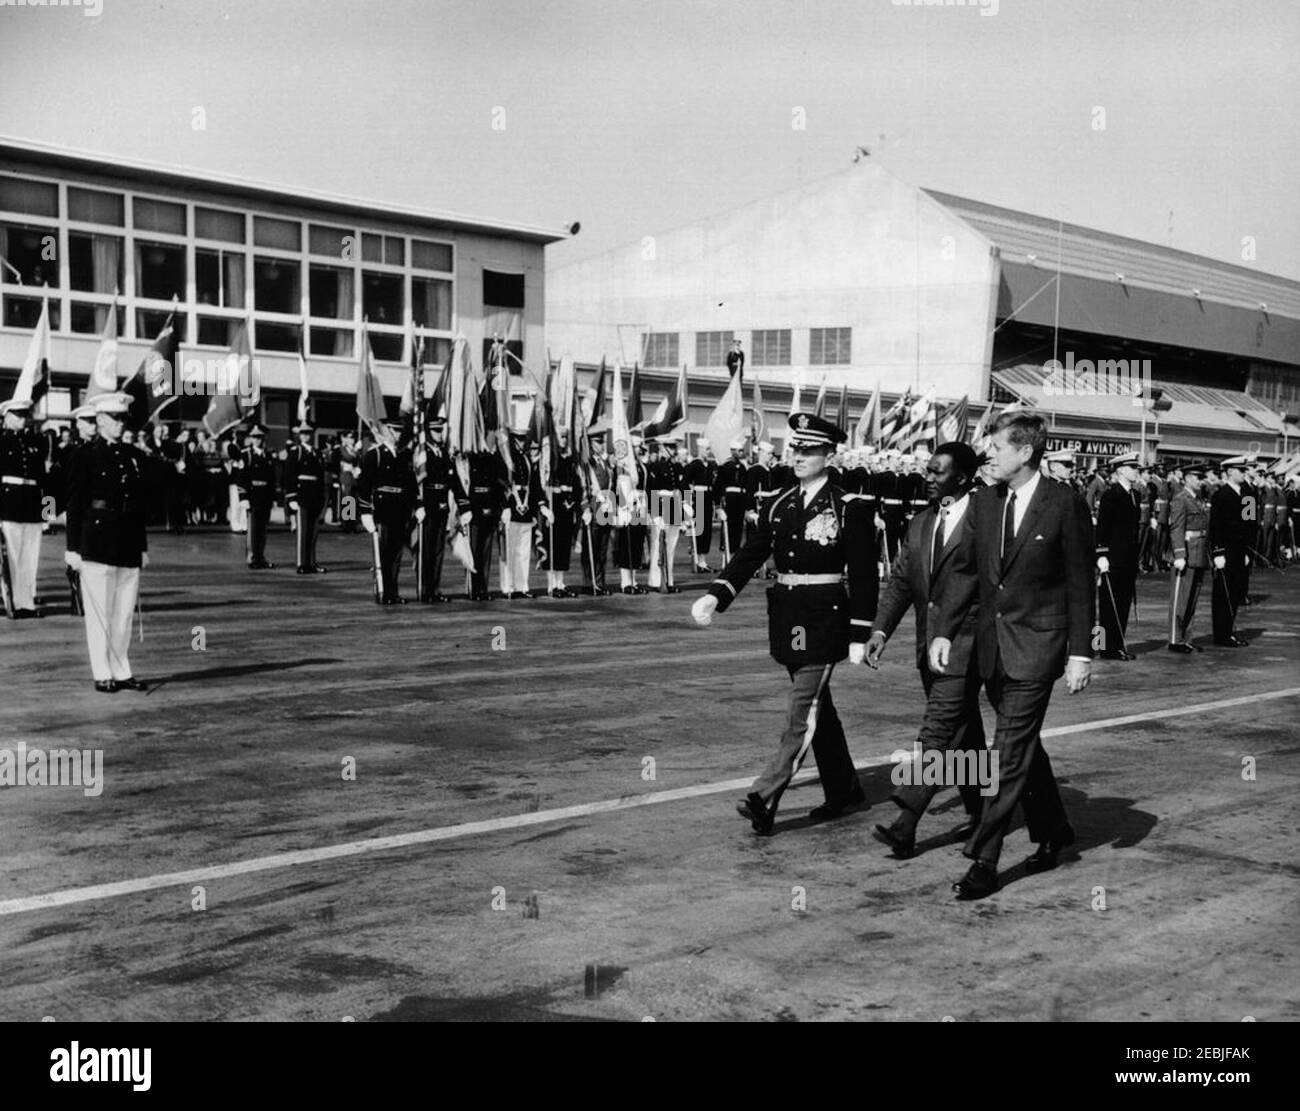 Arrival ceremony for Ahmed Su00e9kou Touru00e9, President of Guinea, 11:00AM. President John F. Kennedy and President of Guinea, Ahmed Su00e9kou Touru00e9, review honor guard troops during arrival ceremonies for President Touru00e9; an unidentified Commander of Troops walks left of the Presidents. Military Air Transport Service (MATS) terminal, Washington National Airport, Washington D.C. Stock Photo